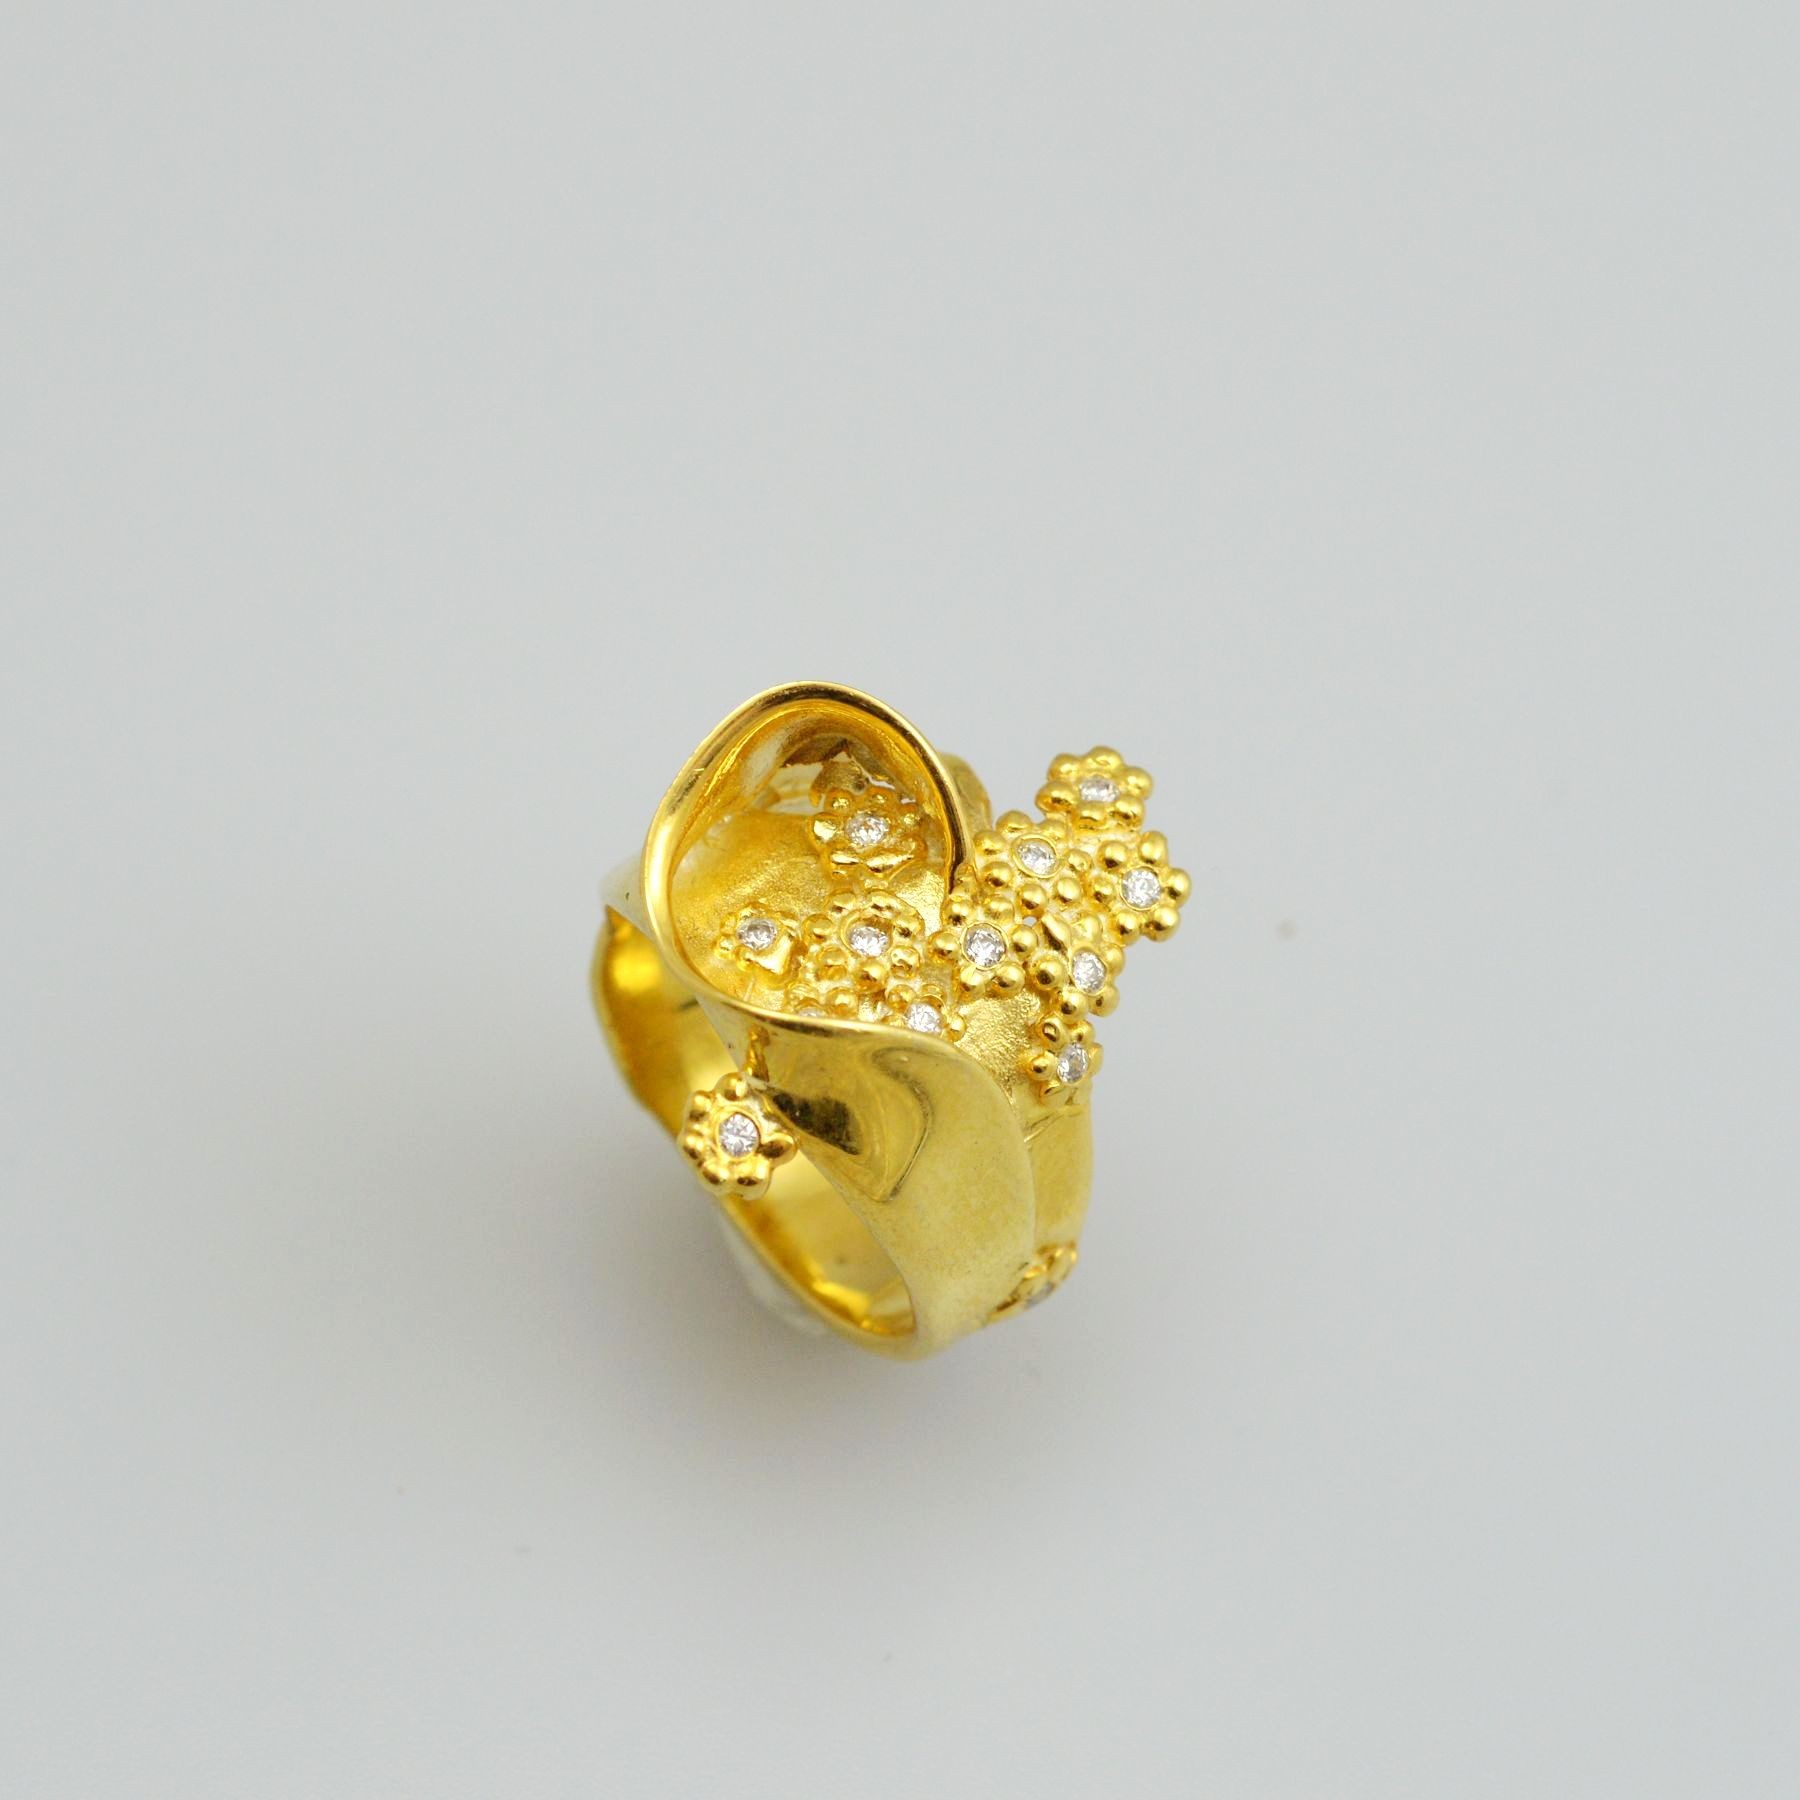 Silver ring 925 goldplated with white synthetic stones